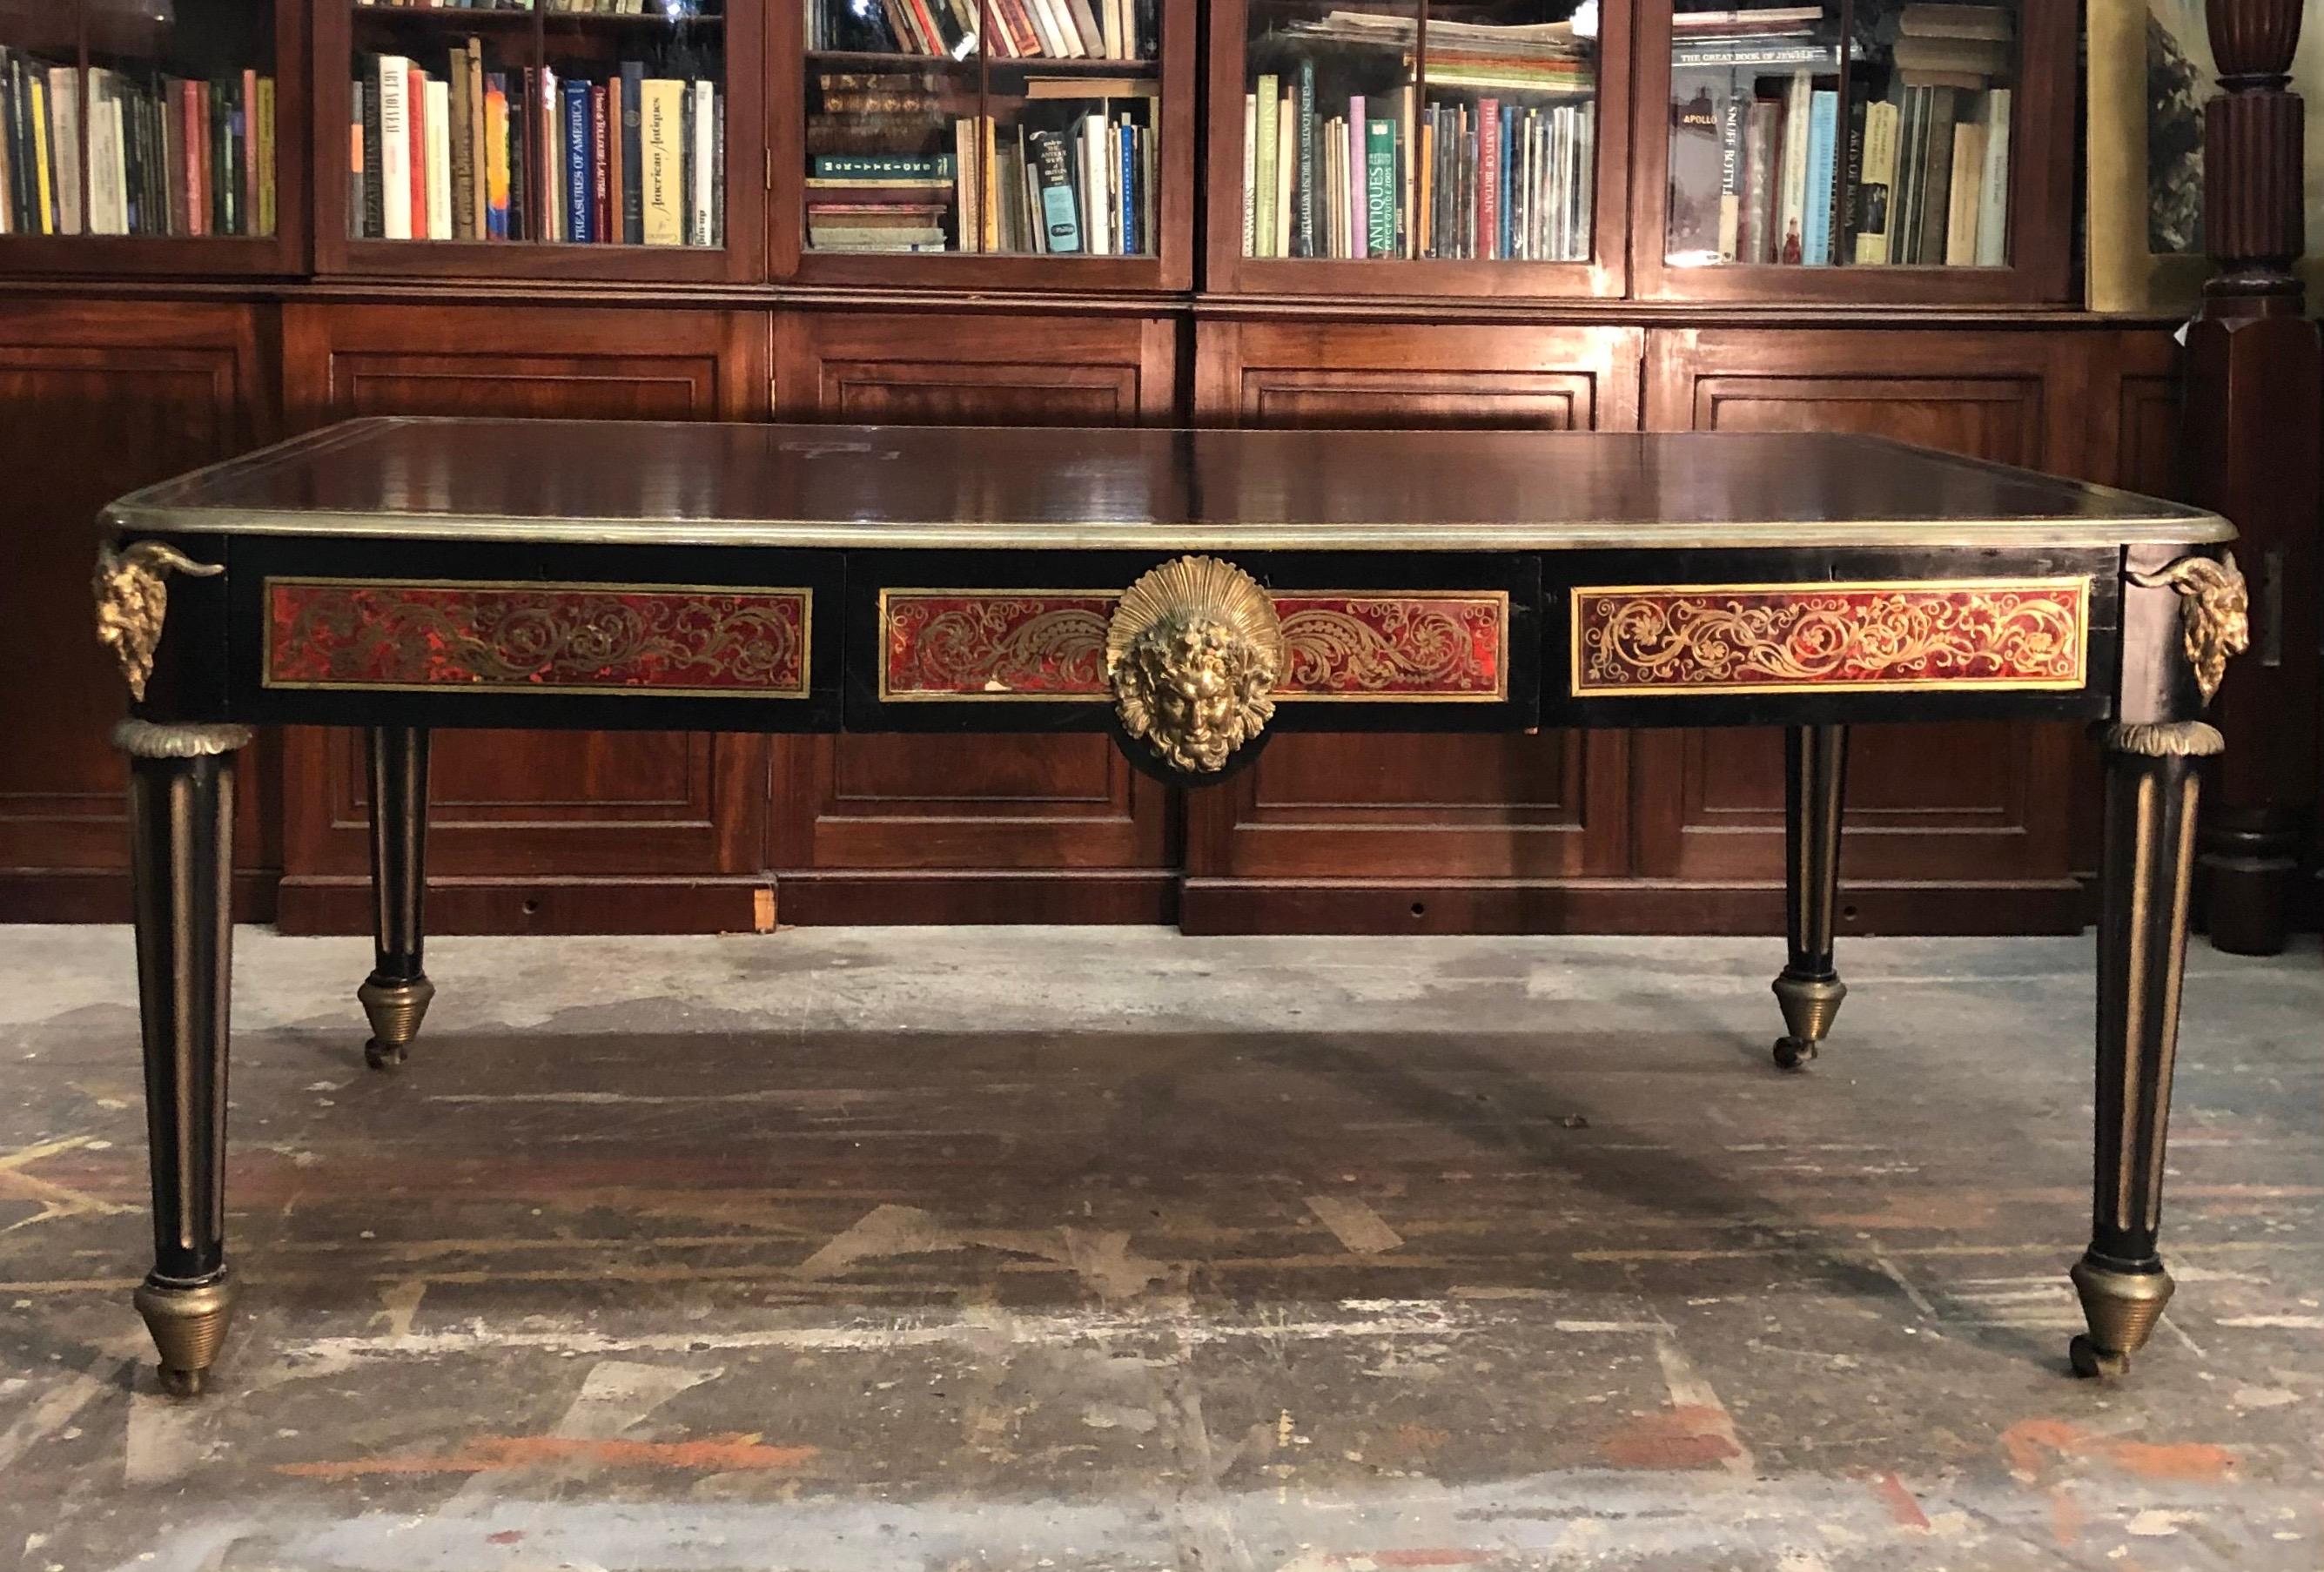 Exceptional French Boulle bureau plat has the English feel of a library table with the four rams head mounted bronze fluted legs terminating in a bronze caster stylized as a beehive. The Boulle marquetry writing desk is finished on both sides with